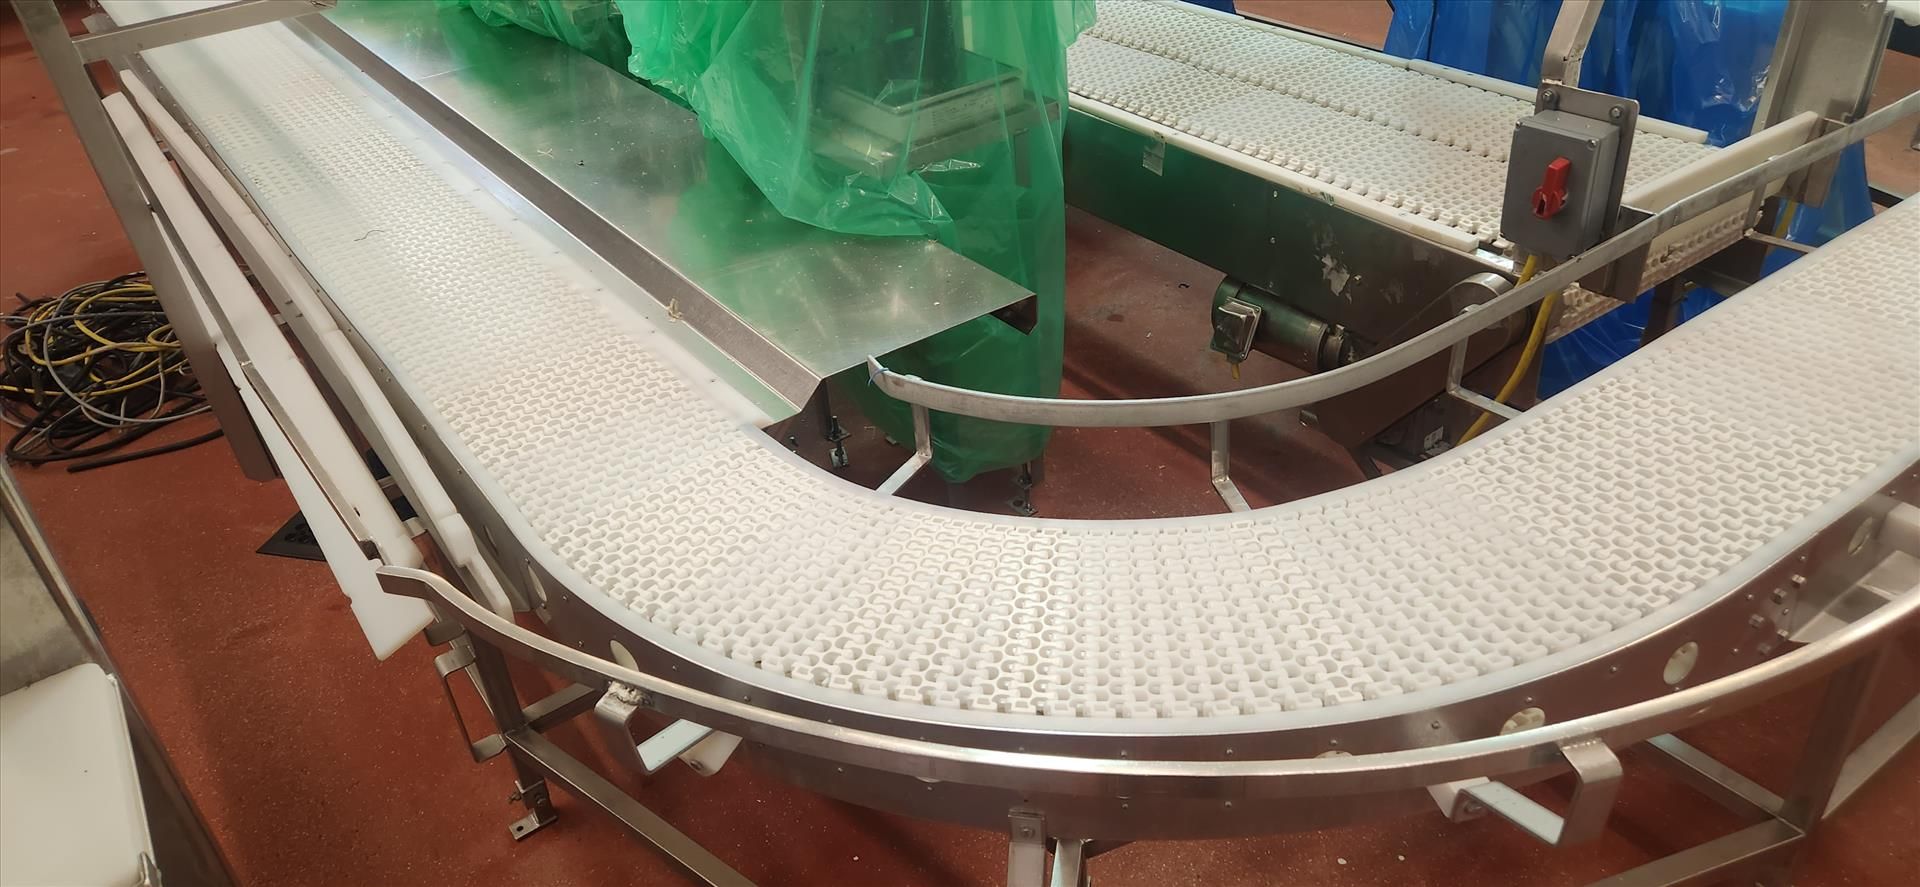 conveyor, belt, stainless steel frame, 180 deg. turn, power, approx. 12 in. x 40 ft. [Loc. Cut-Up] - Image 2 of 2